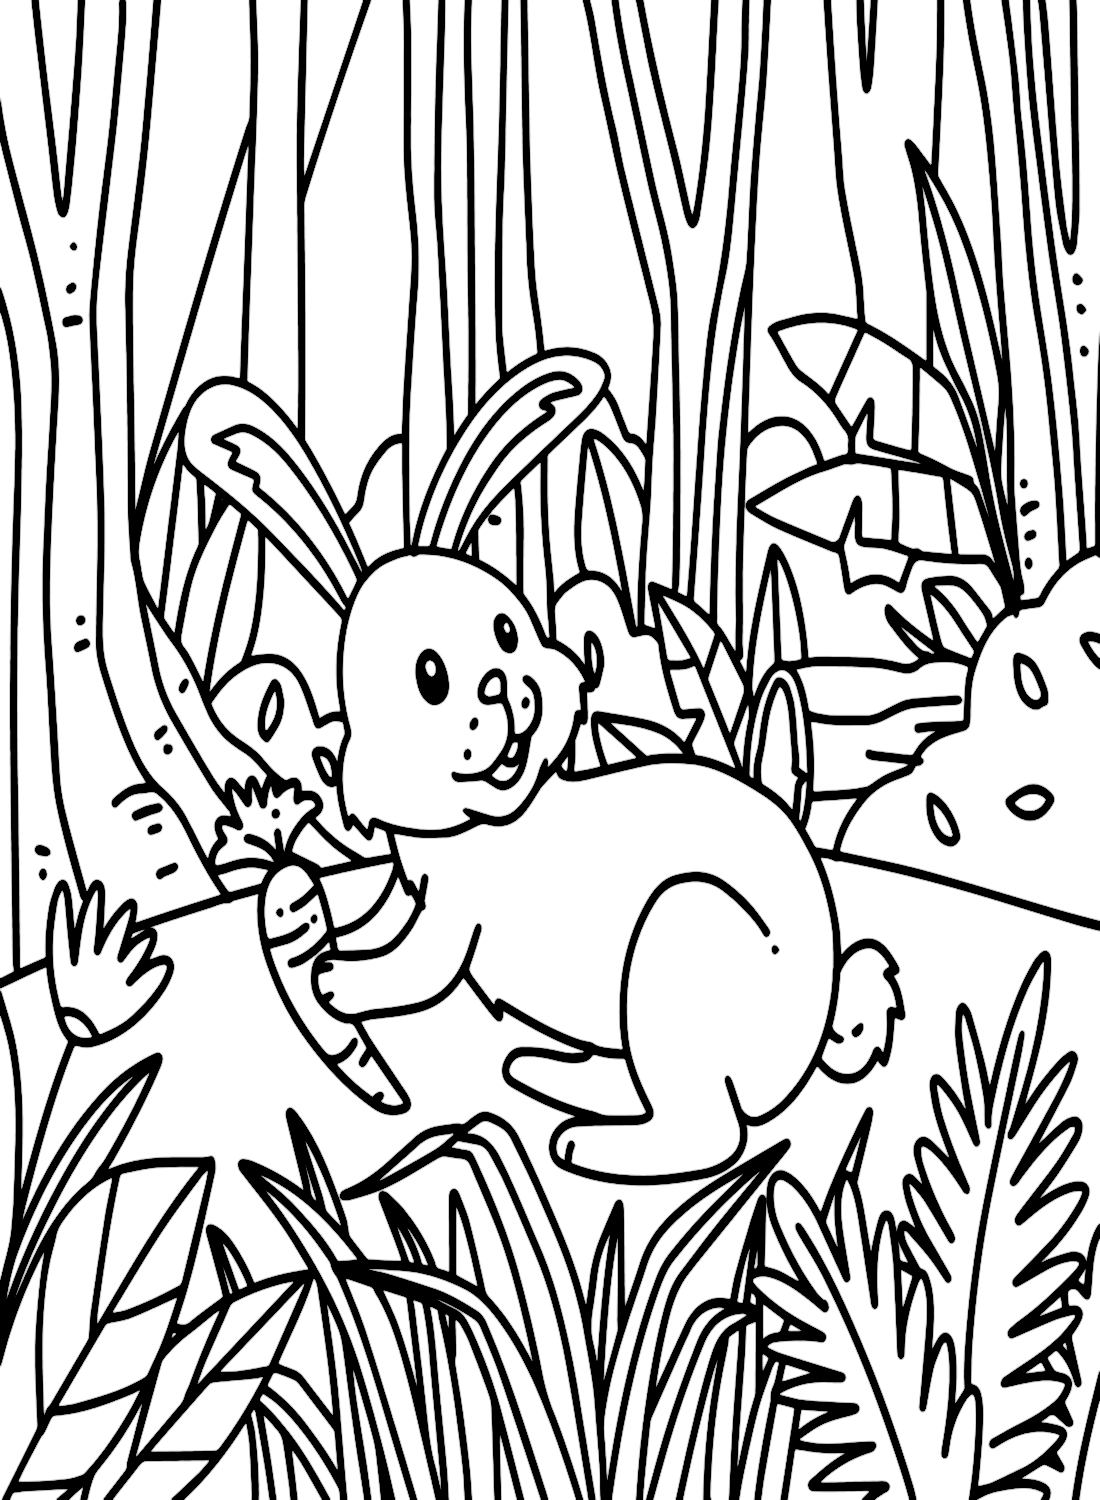 Rabbit Holding A Carrot Coloring Page - Free Printable Coloring Pages